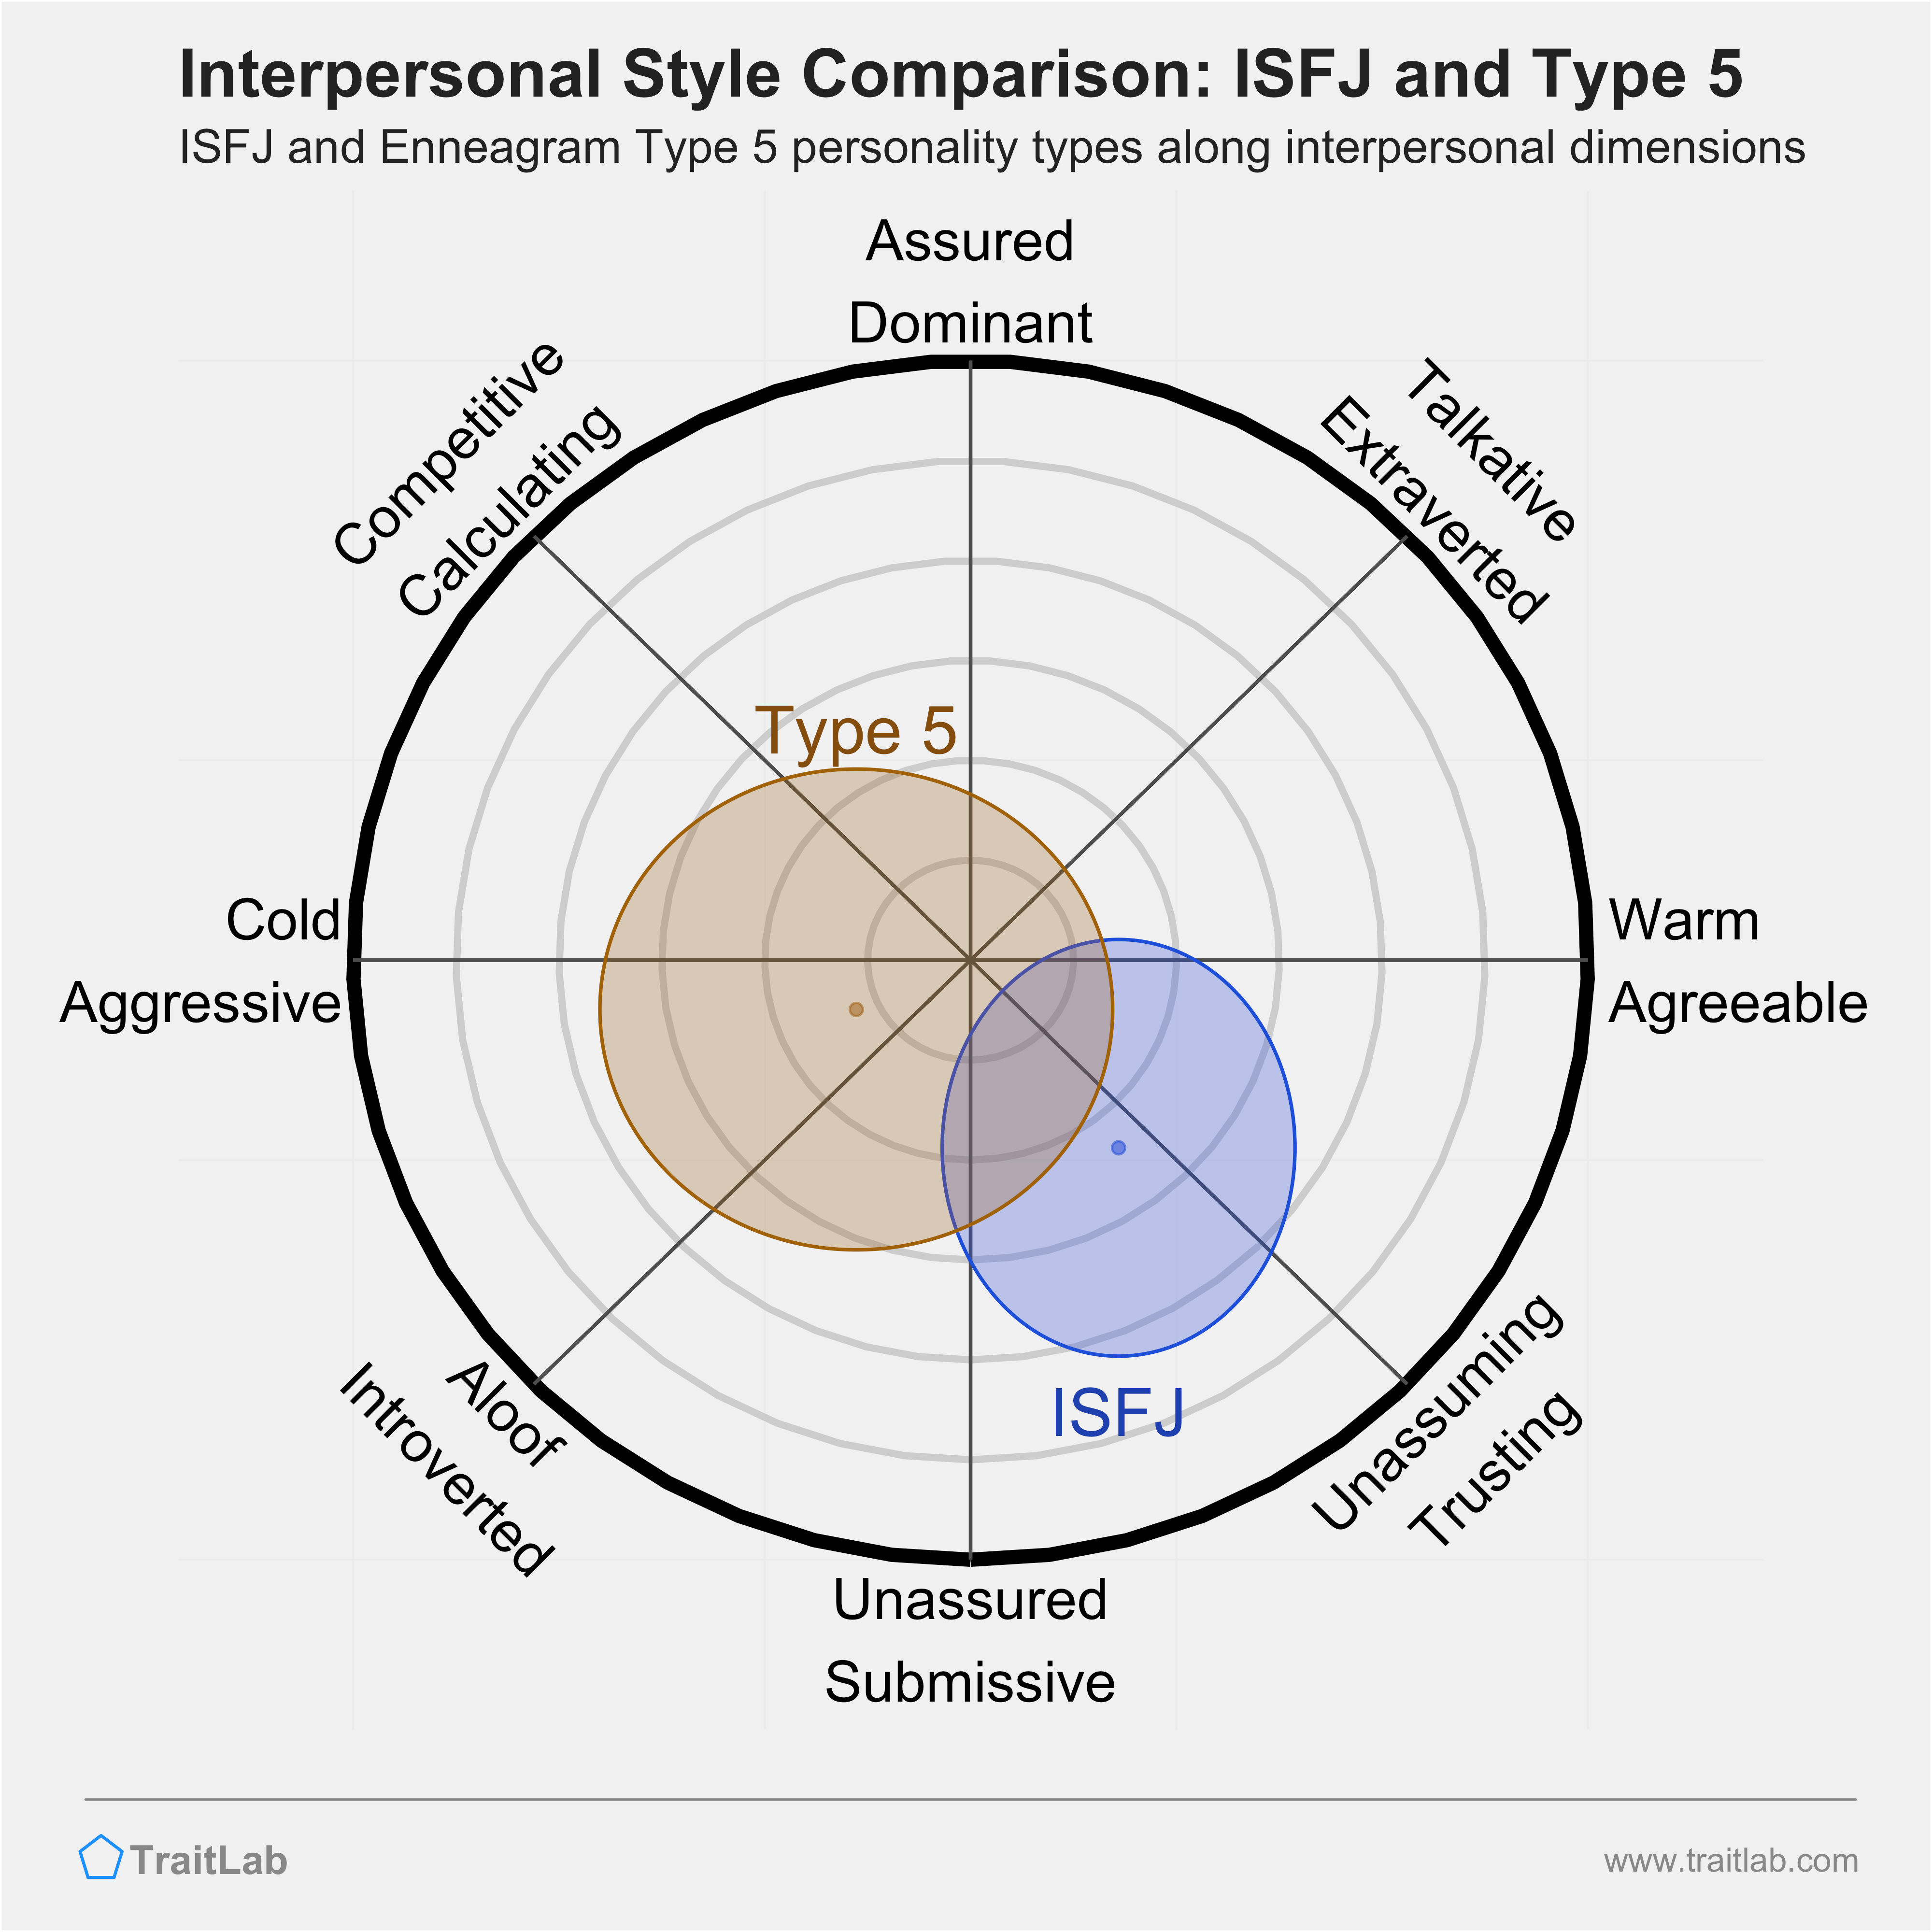 Enneagram ISFJ and Type 5 comparison across interpersonal dimensions